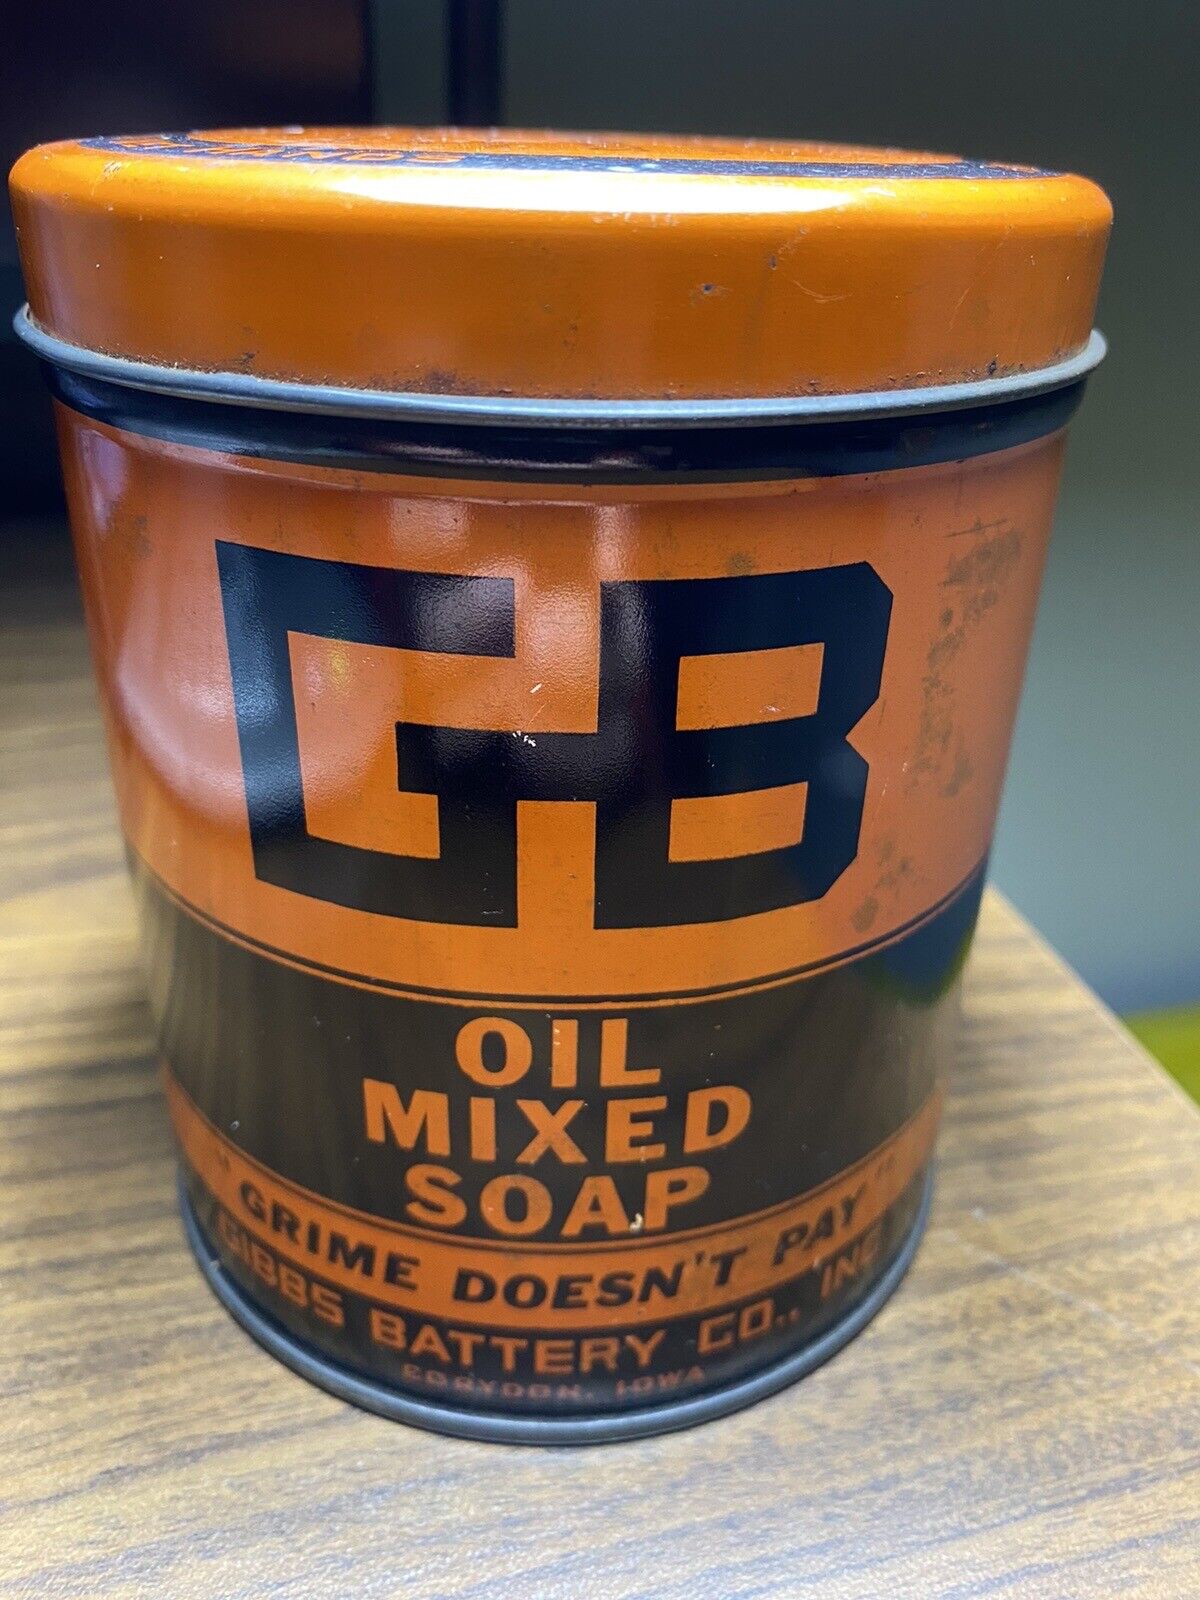 Vintage GB Oil Mixed Soap Metal 2lb Can “Grime Doesn’t Pay” Gibbs Battery Co